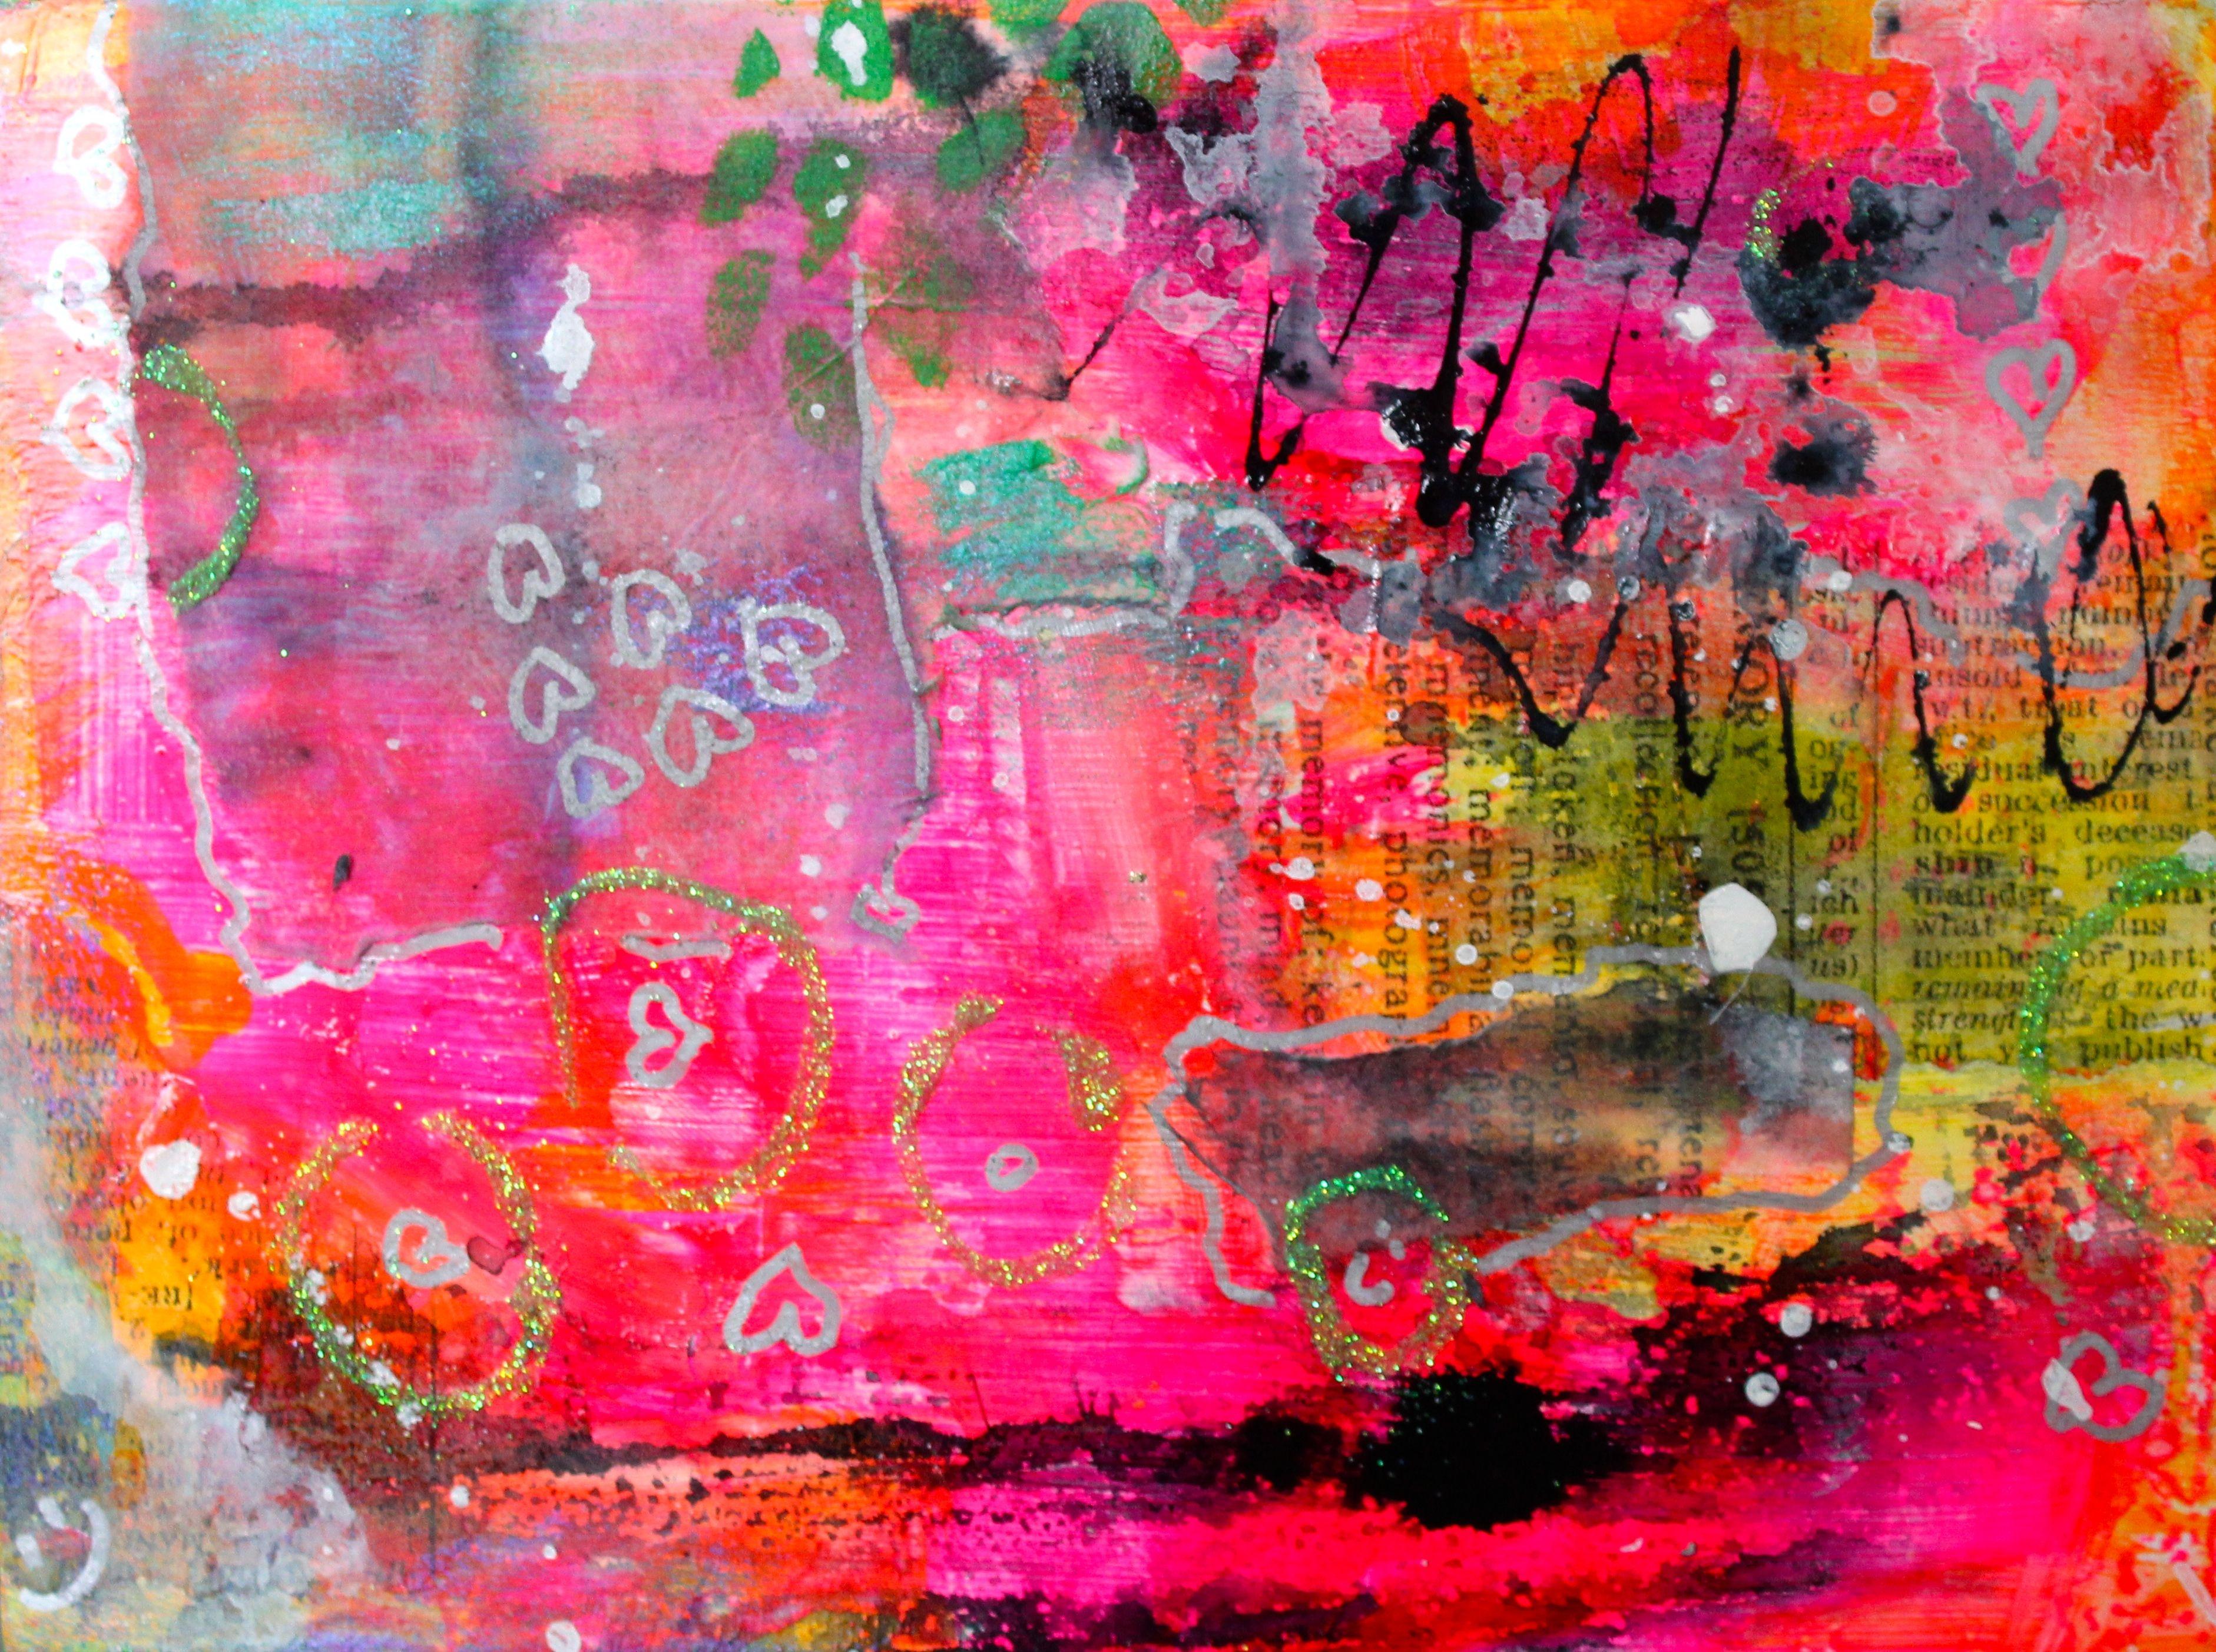 Unapologetically, Mixed Media on MDF Panel - Mixed Media Art by Laura Spring